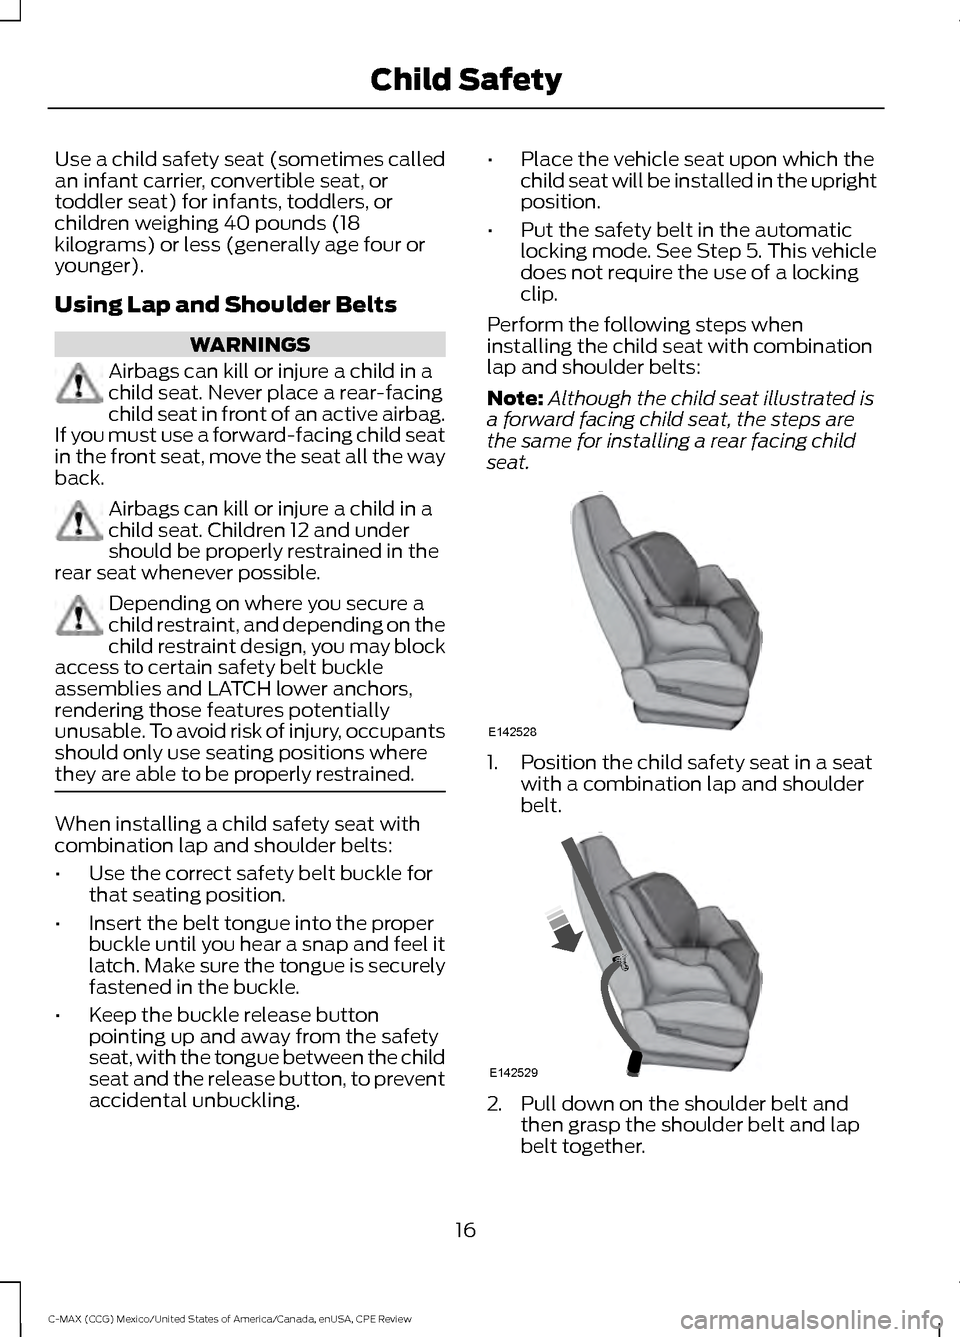 FORD C MAX HYBRID 2015 2.G User Guide Use a child safety seat (sometimes called
an infant carrier, convertible seat, or
toddler seat) for infants, toddlers, or
children weighing 40 pounds (18
kilograms) or less (generally age four or
youn